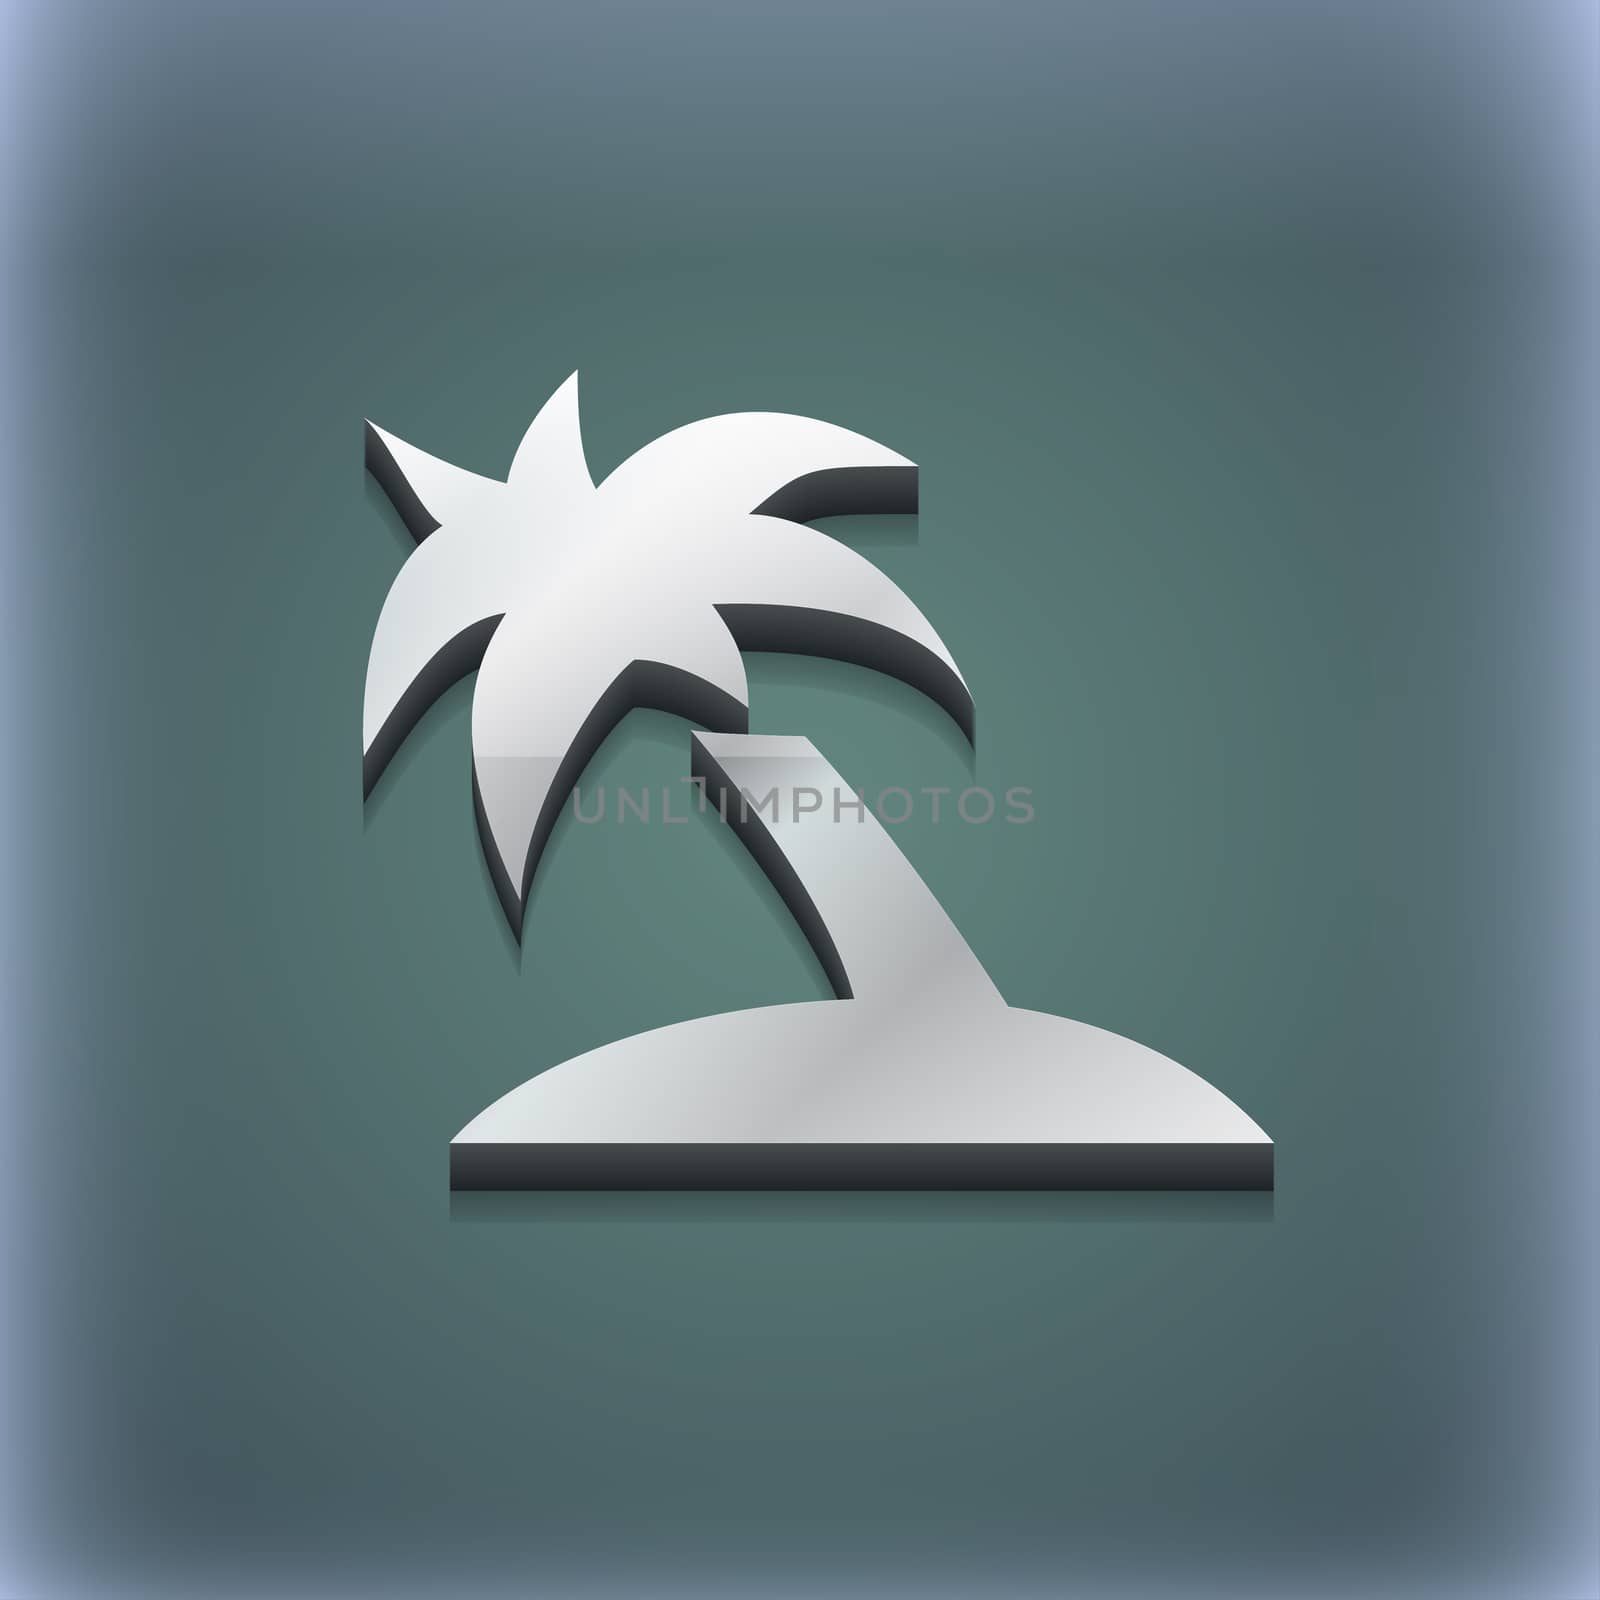 Palm Tree, Travel trip icon symbol. 3D style. Trendy, modern design with space for your text illustration. Raster version